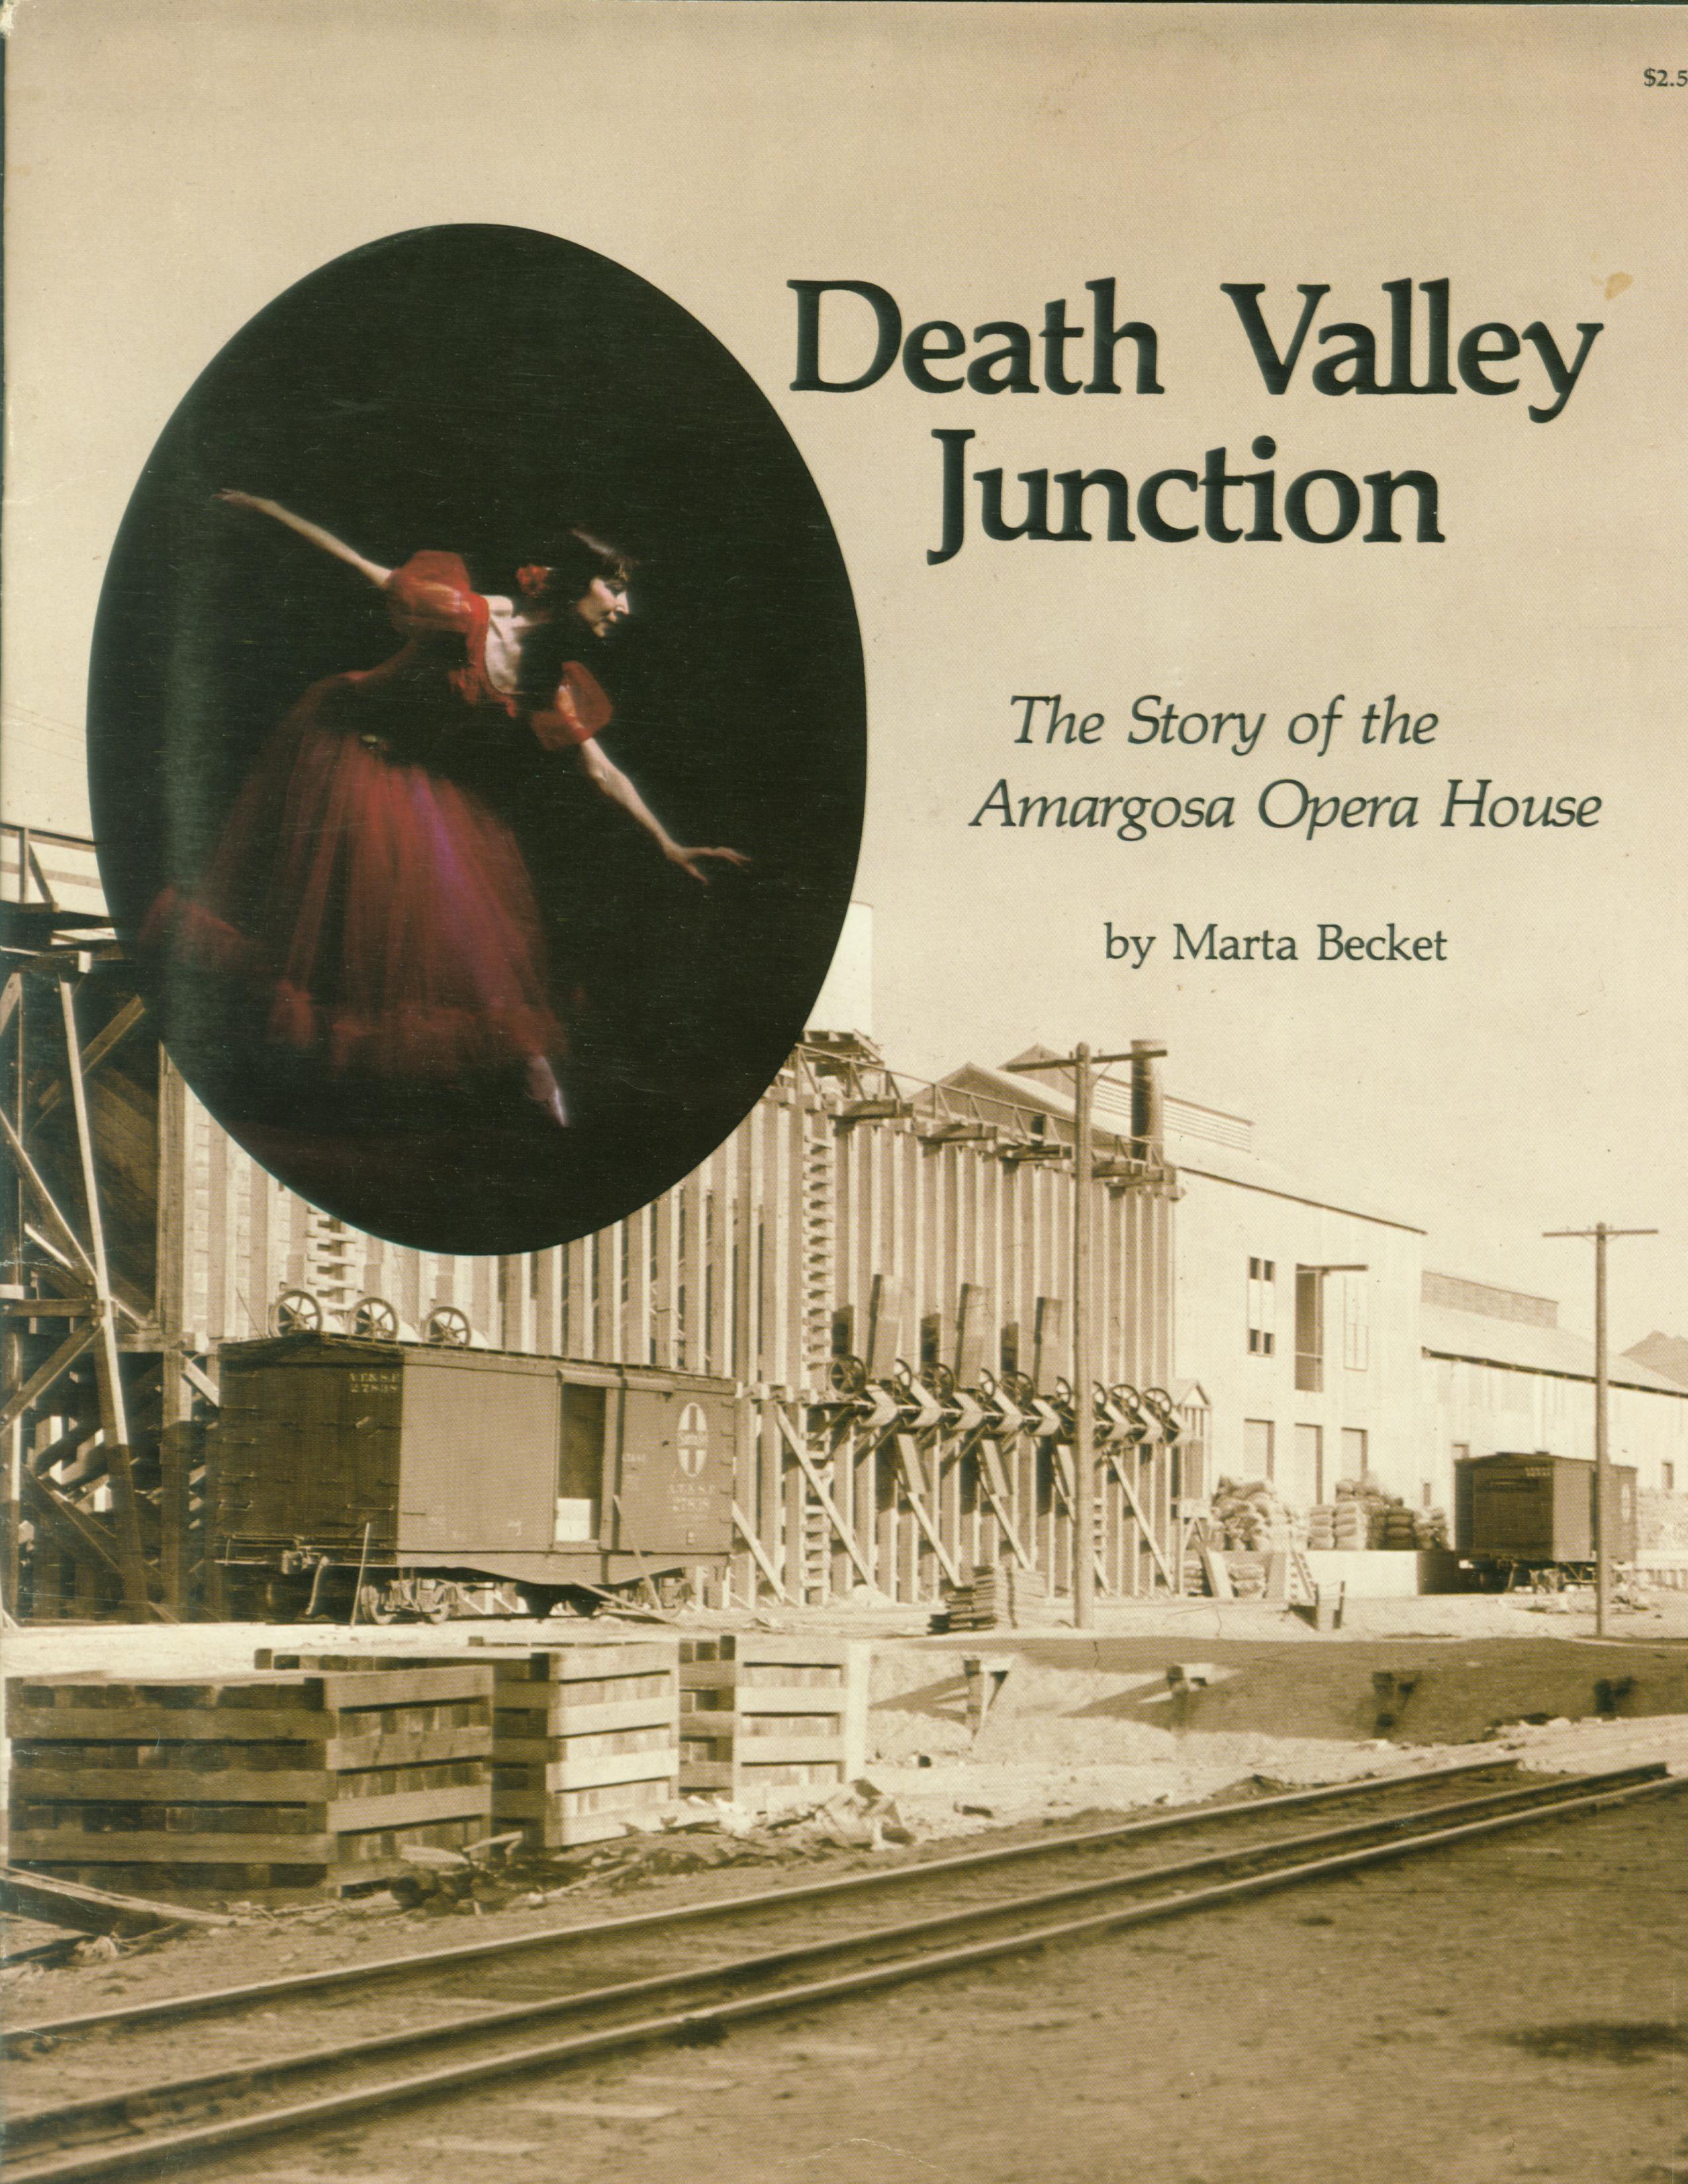 DEATH VALLEY JUNCTION: the story of the Amargosa Opera House.